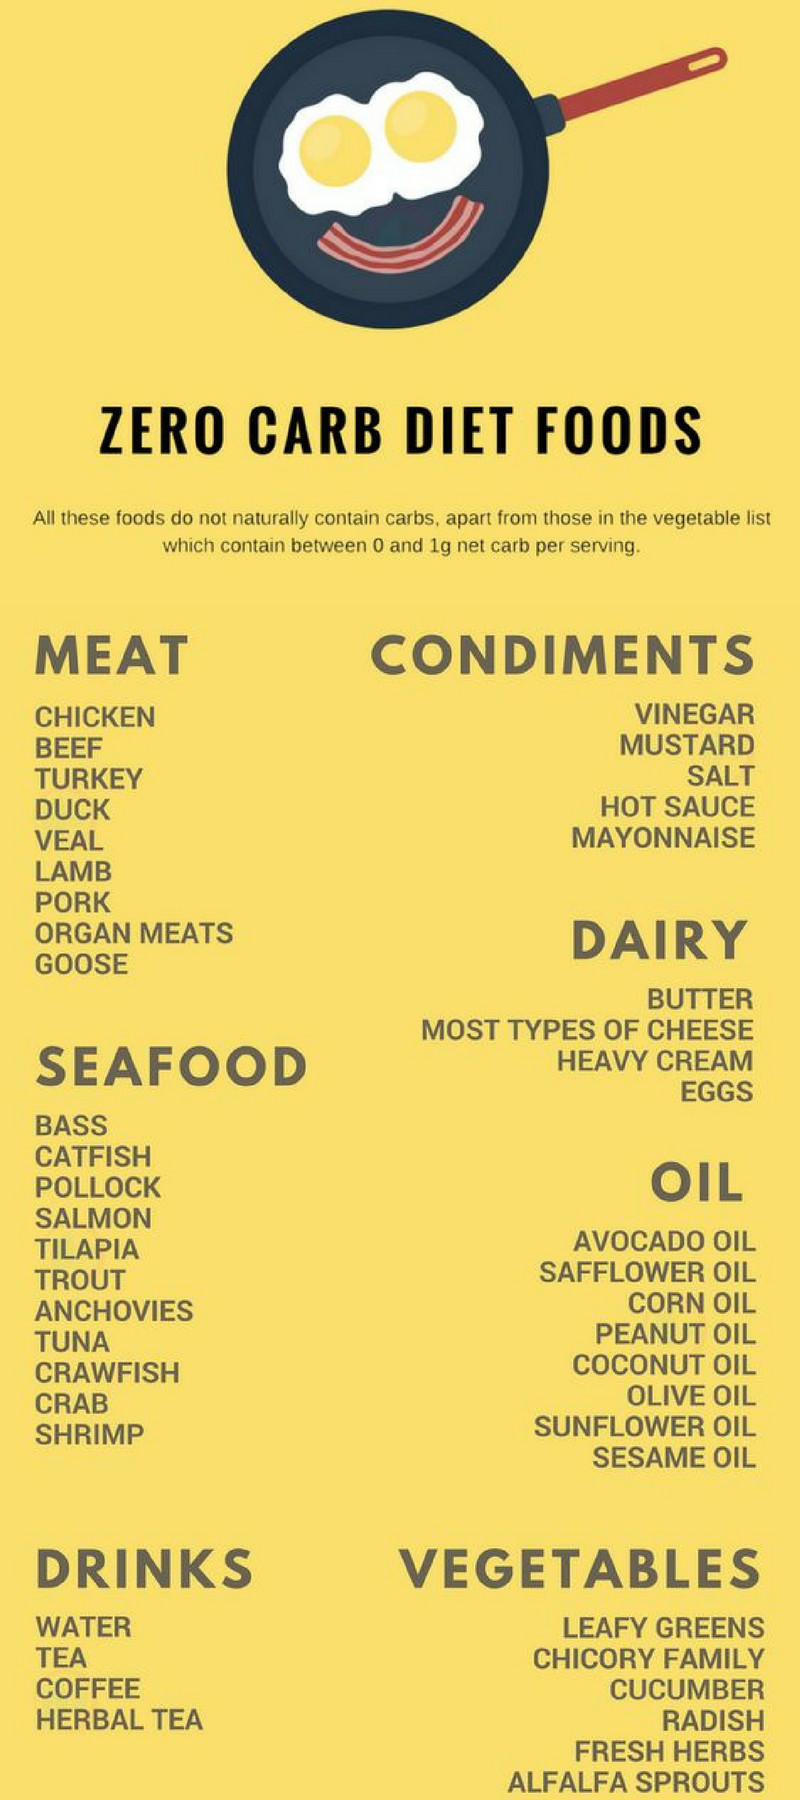 Keto Diet For Beginners Keto Diet For Beginners Meal Plan With Grocery List
 The Ultimate Keto Diet Beginner s Guide & Grocery List